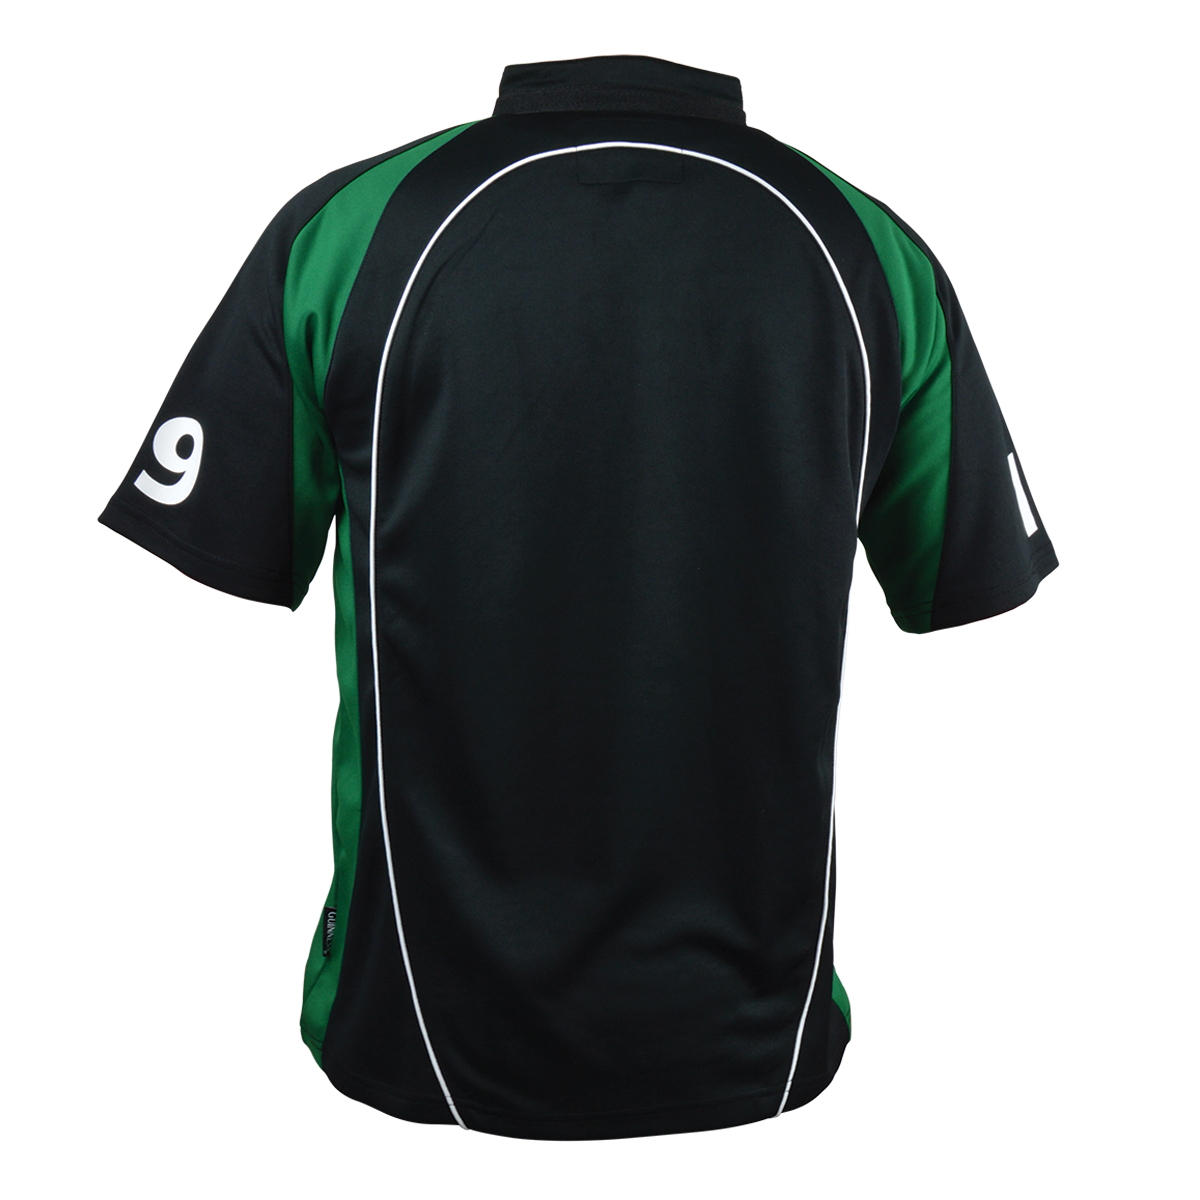 Guinness Short Sleeve Performance Rugby Jersey